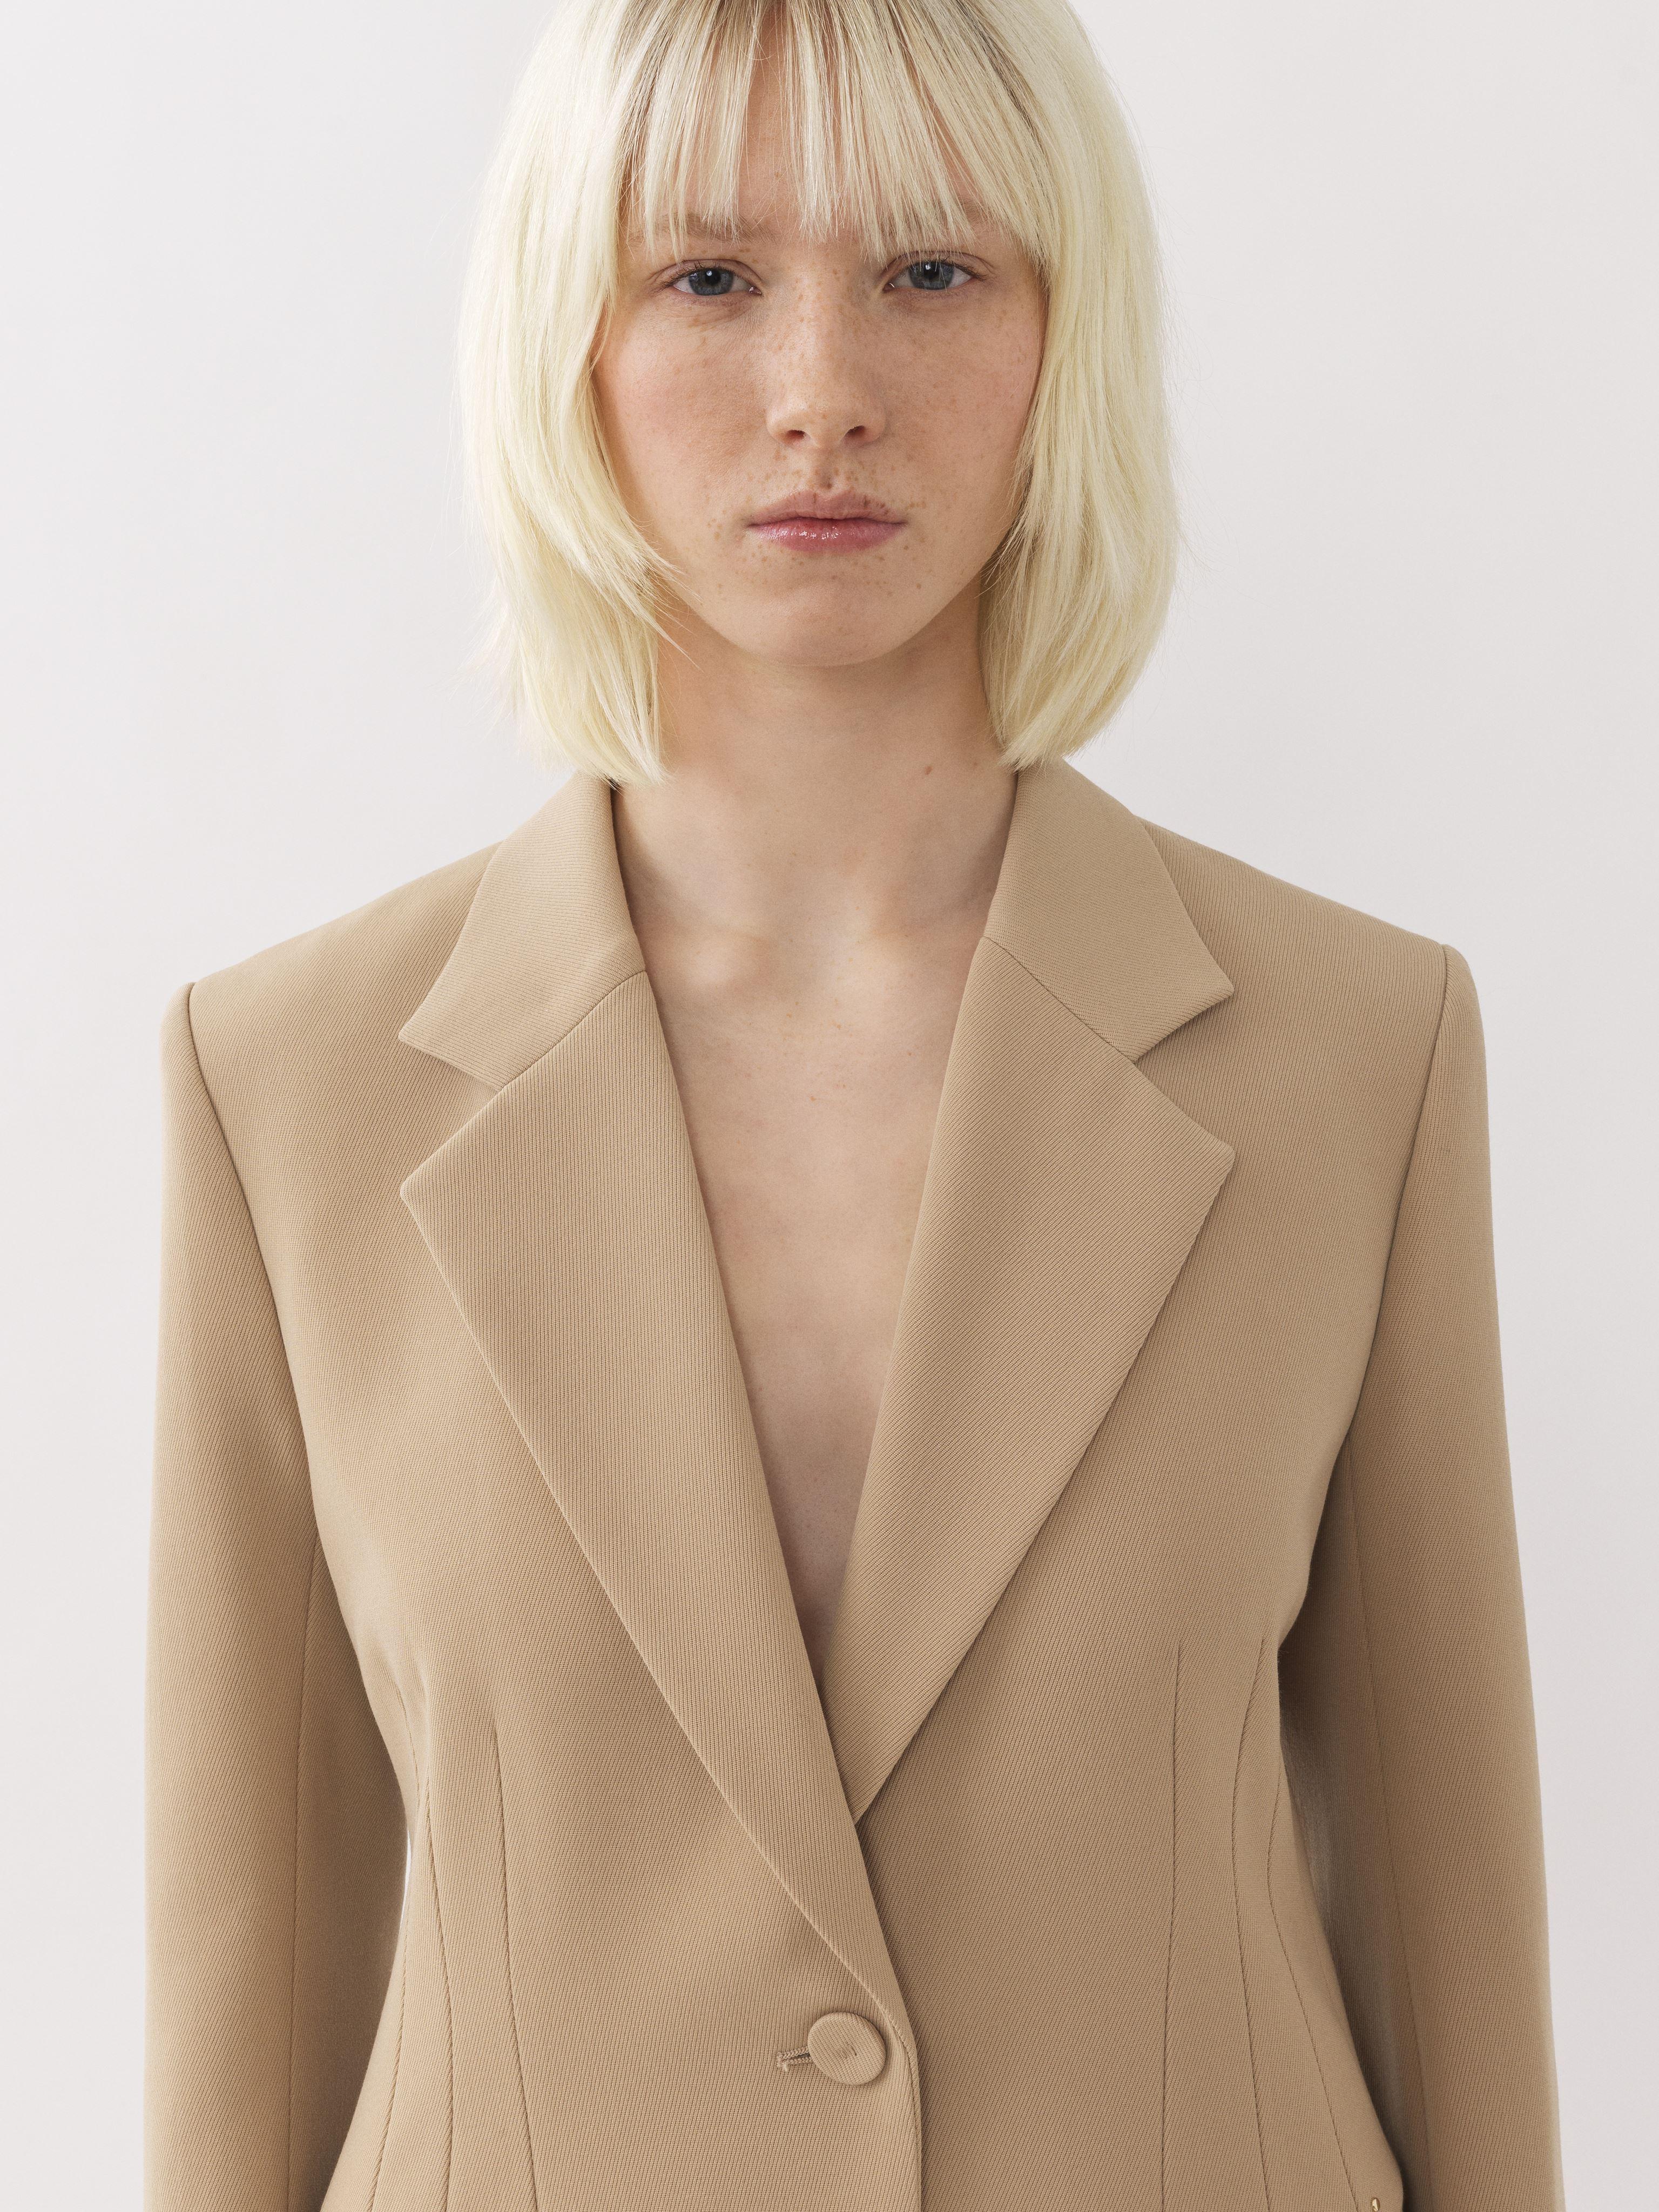 Chloé Bell-shaped Jacket in Natural | Lyst